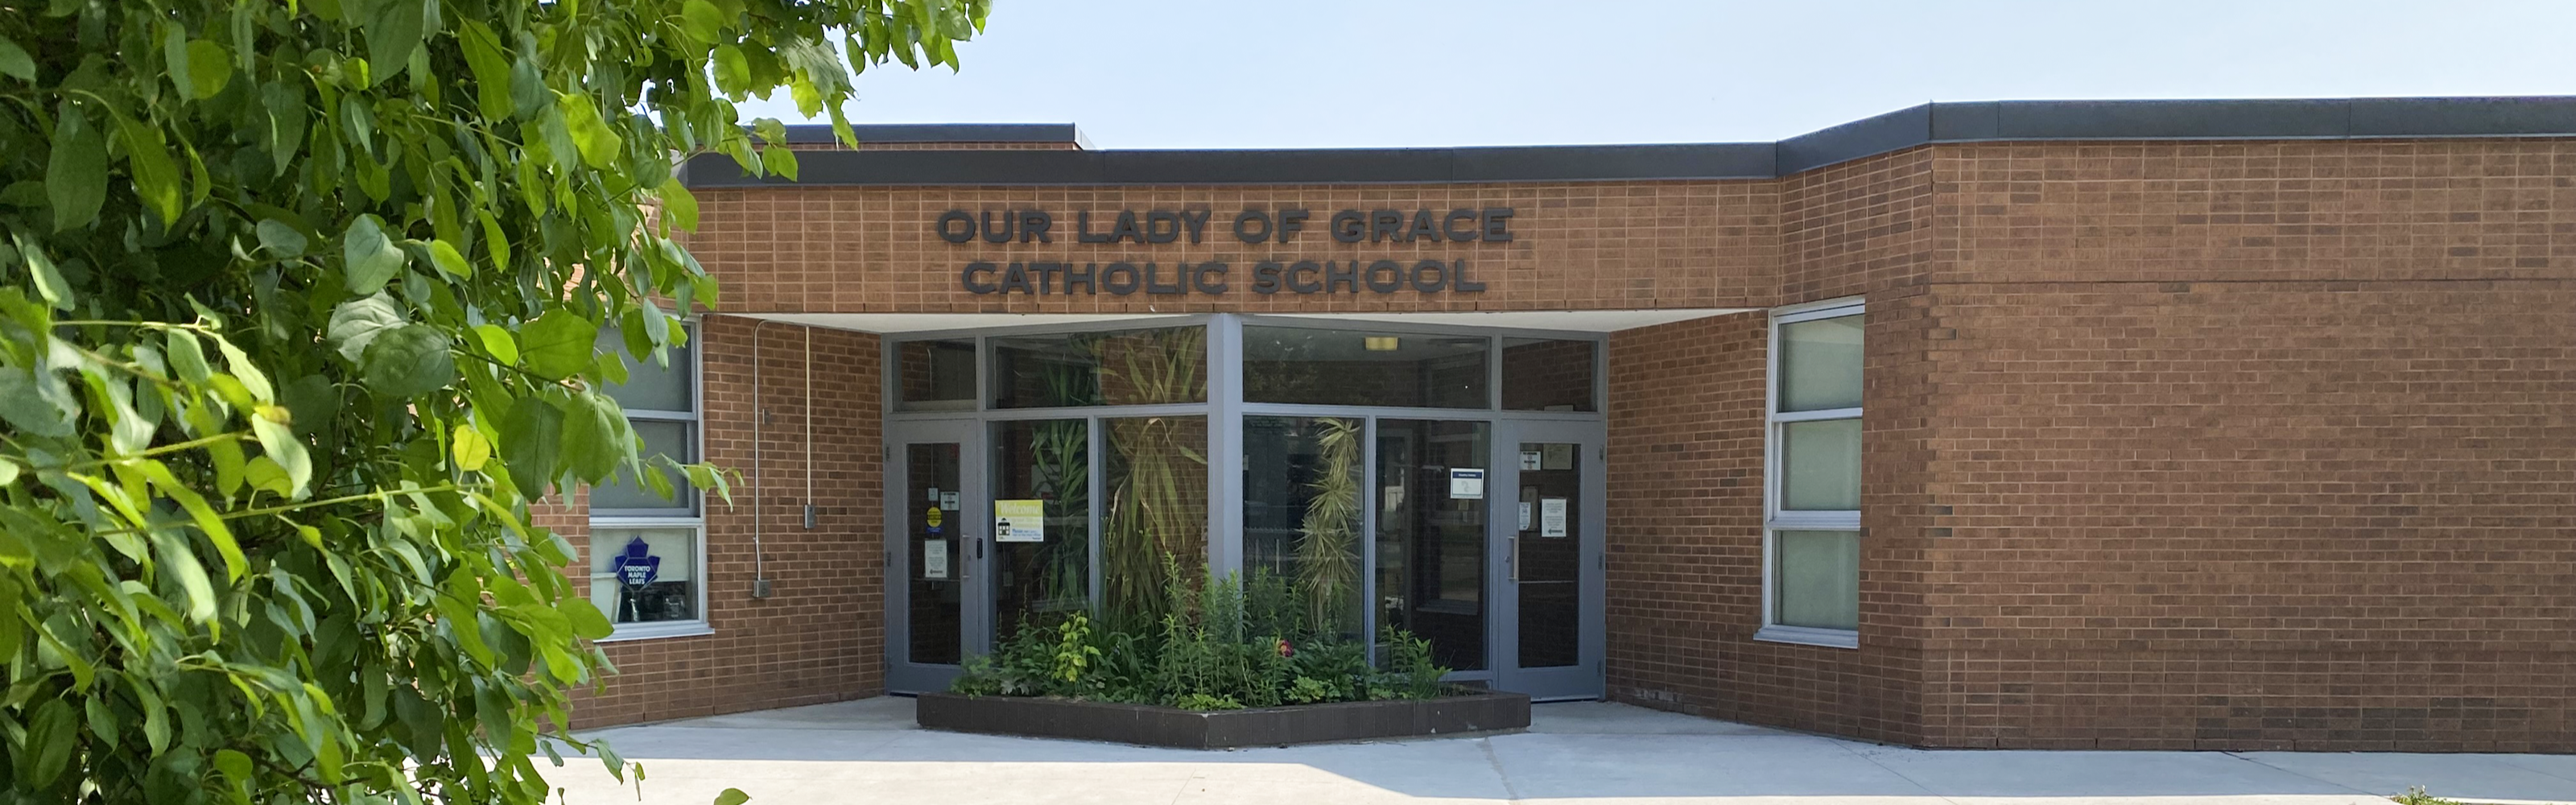 The front of the Our Lady of Grace Catholic School building.